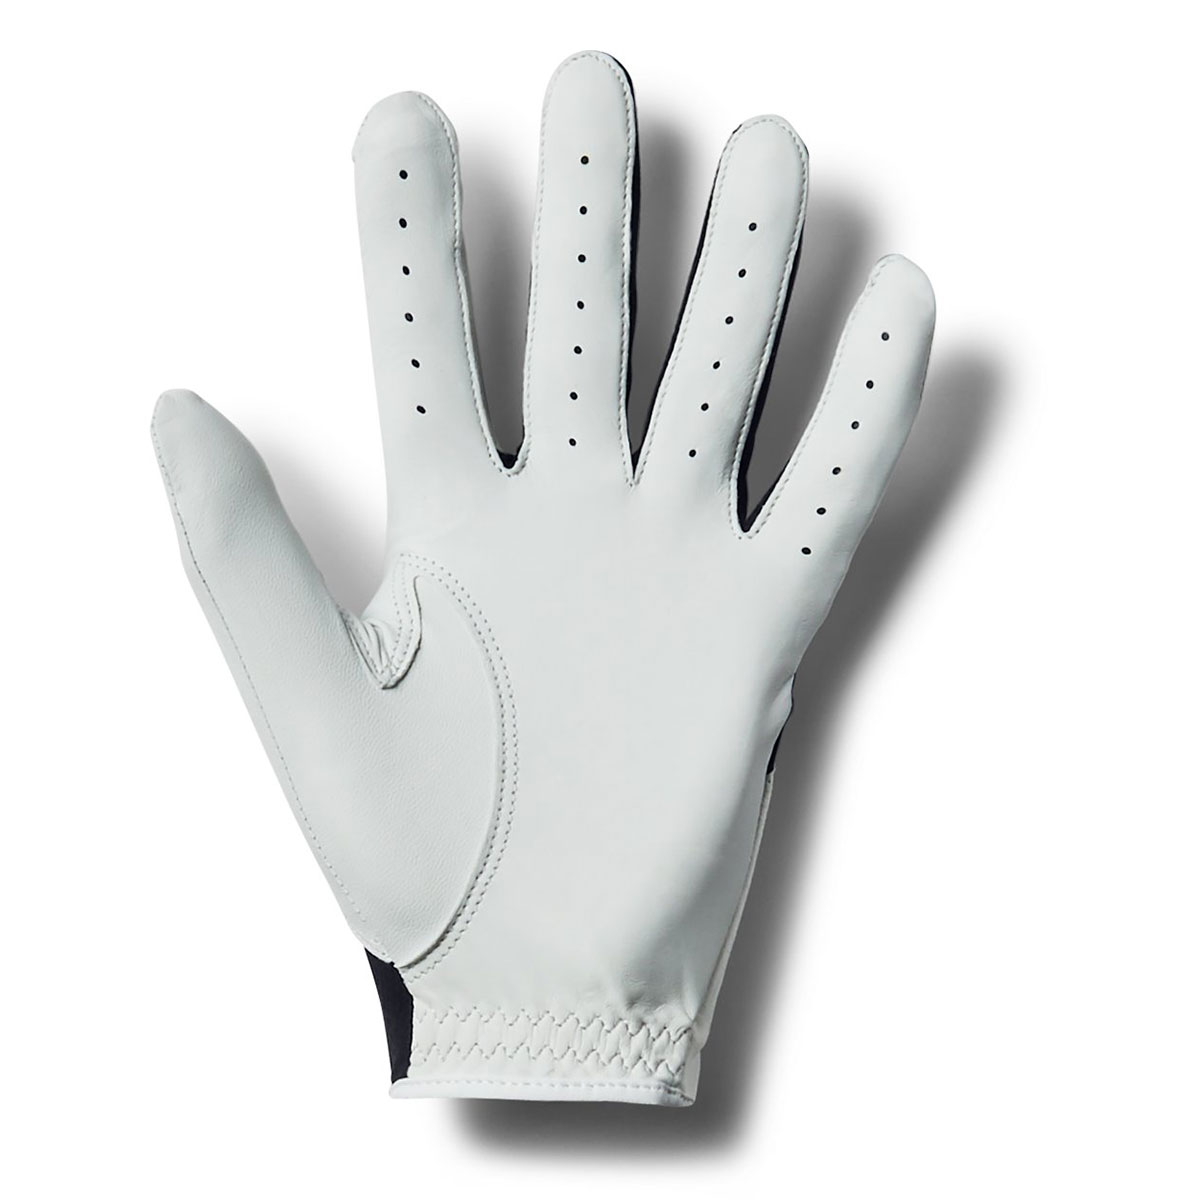 Under Armour Mens UA Iso-Chill Golf Glove  - Black